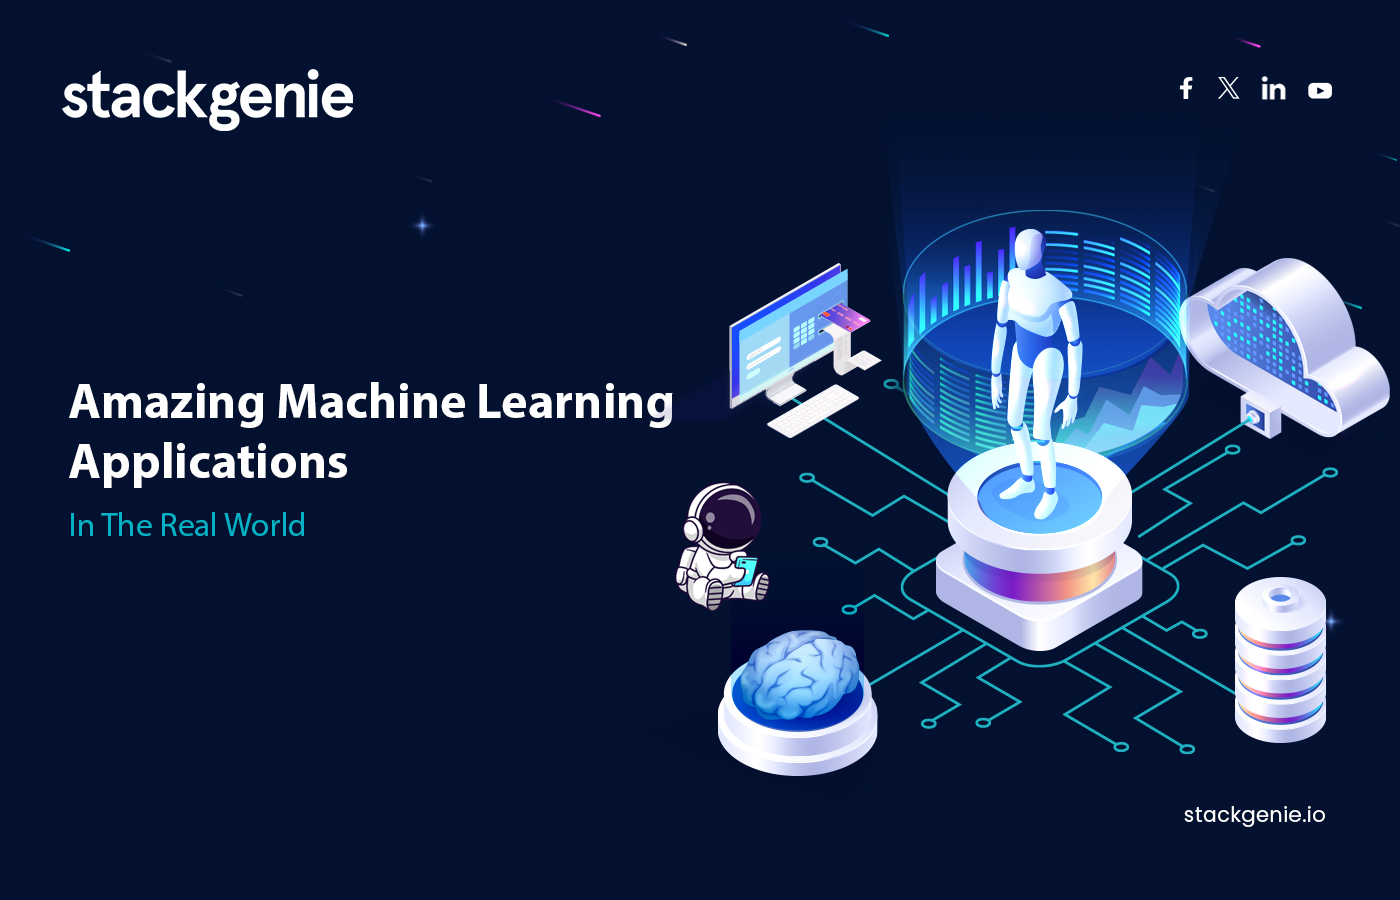 15 Amazing Machine Learning Applications in the Real World